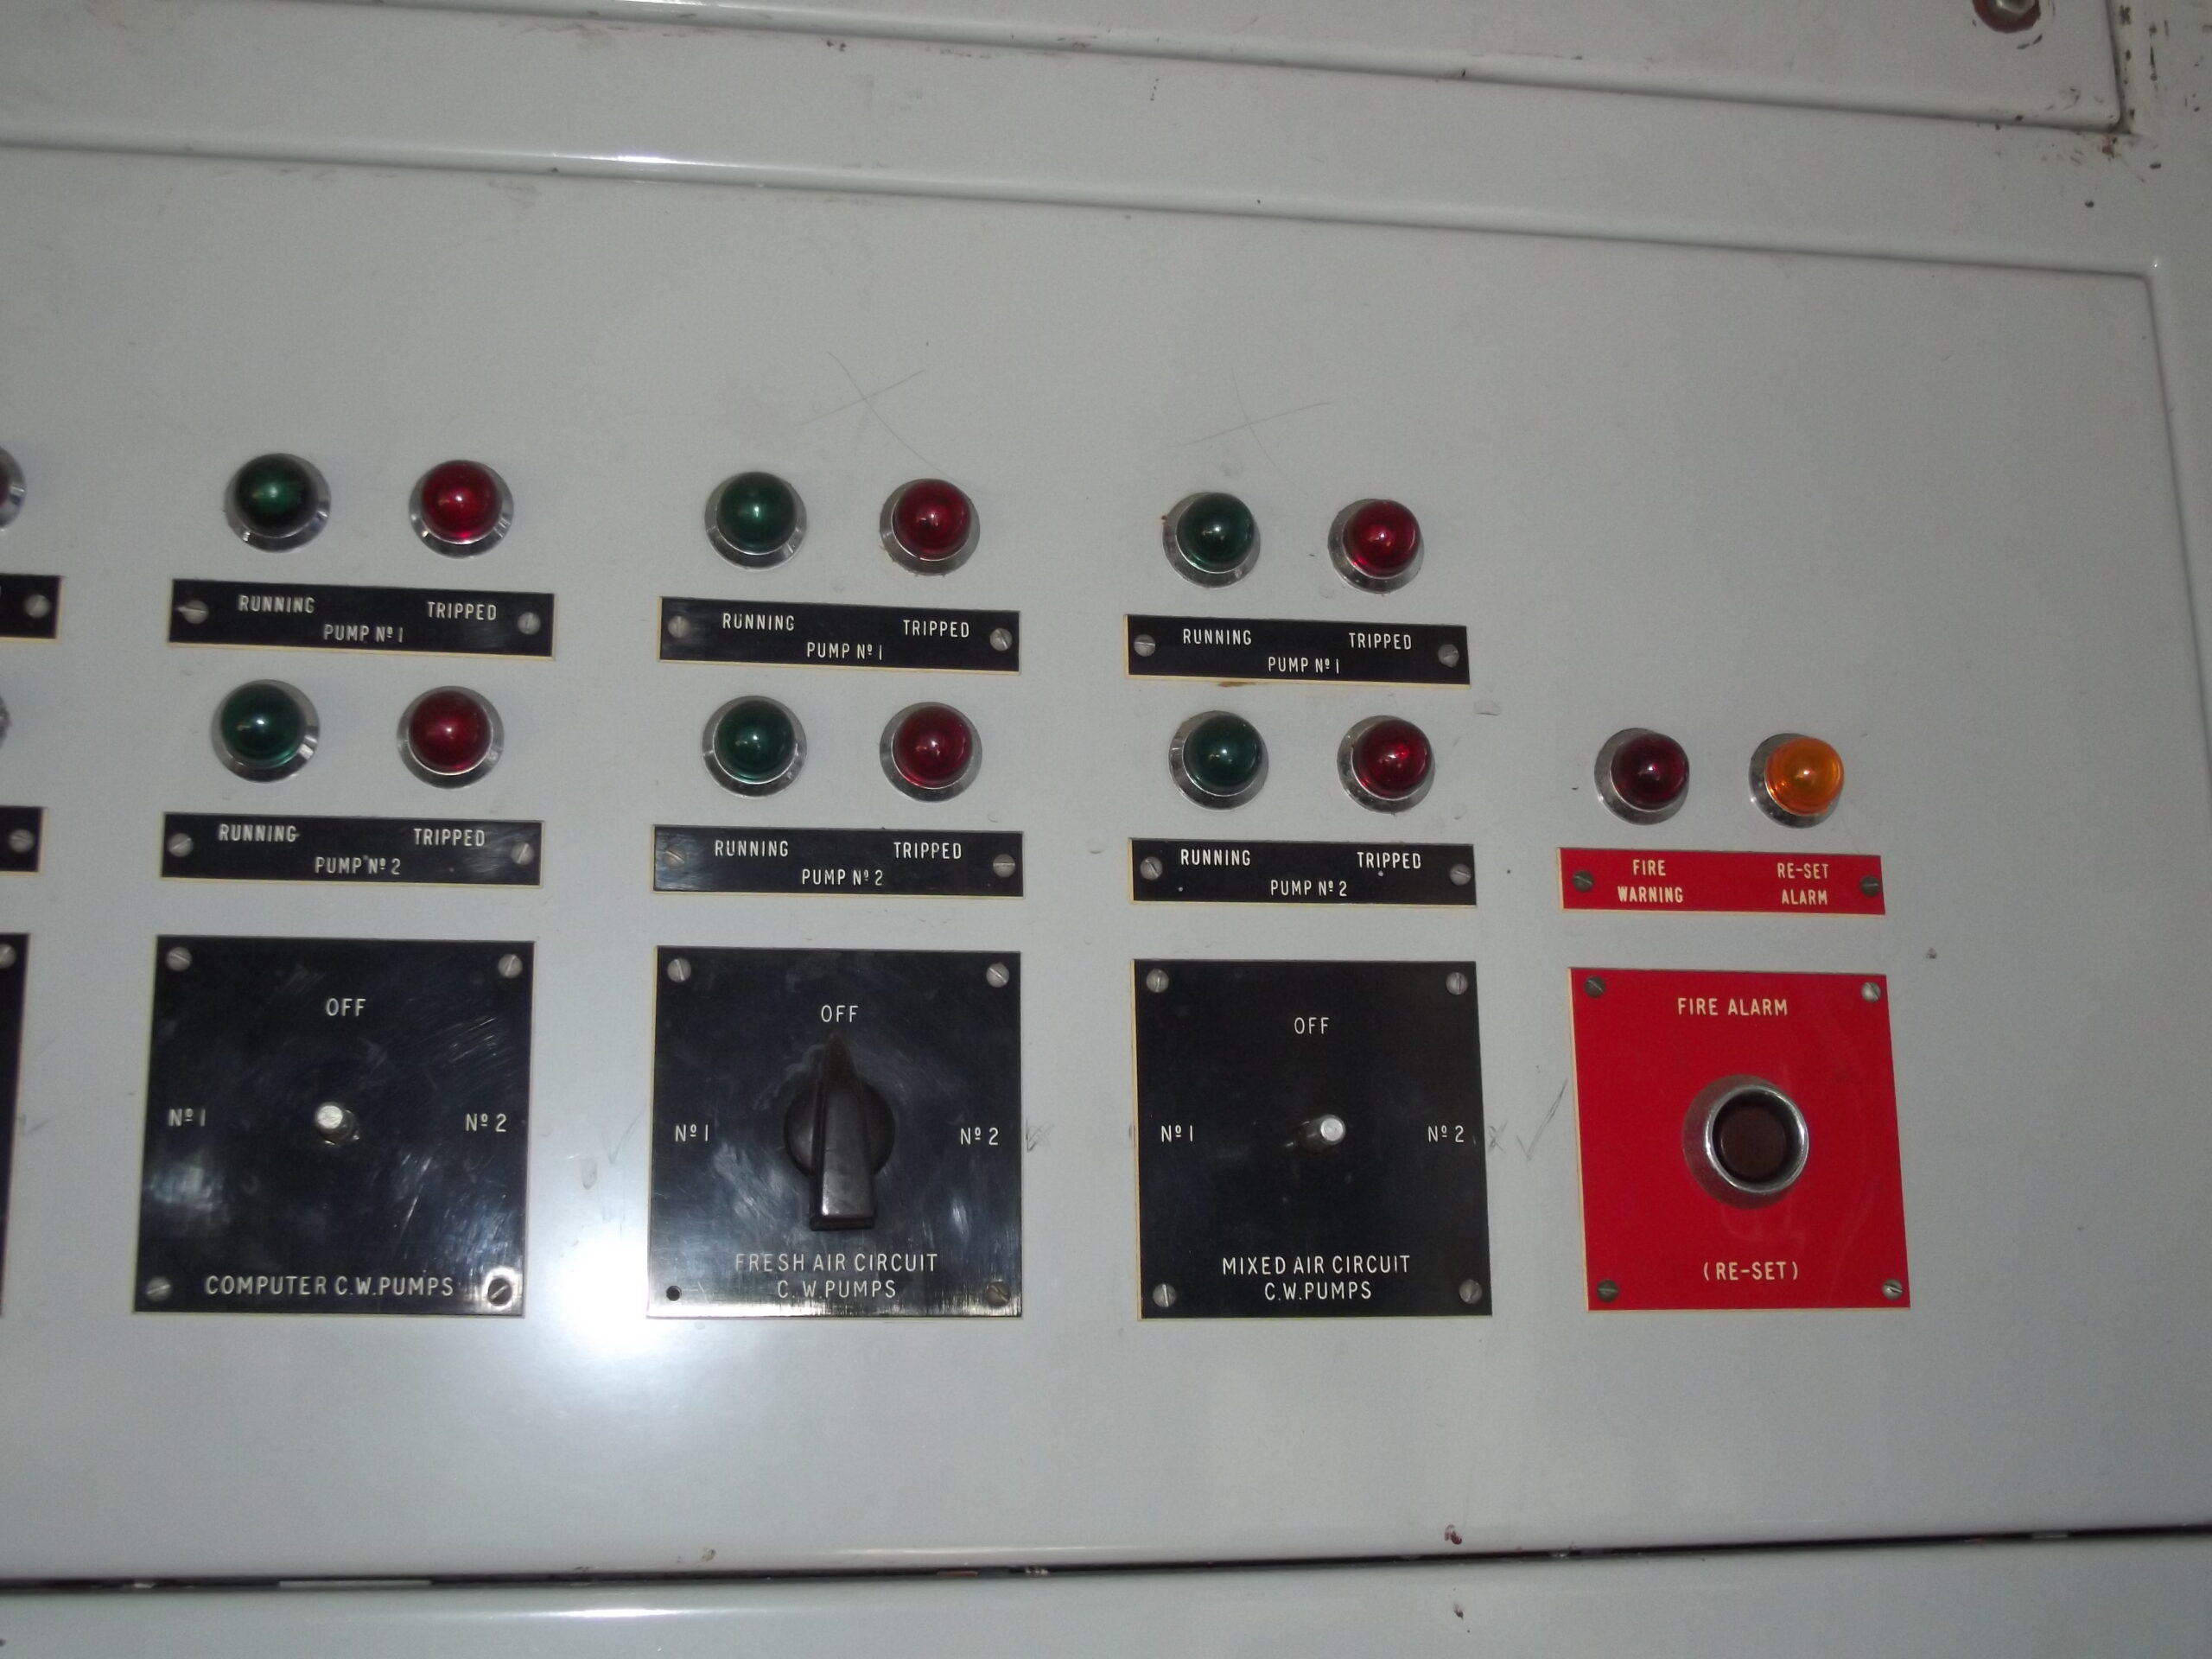 W407 rooftop air conditioning plant room - control panel